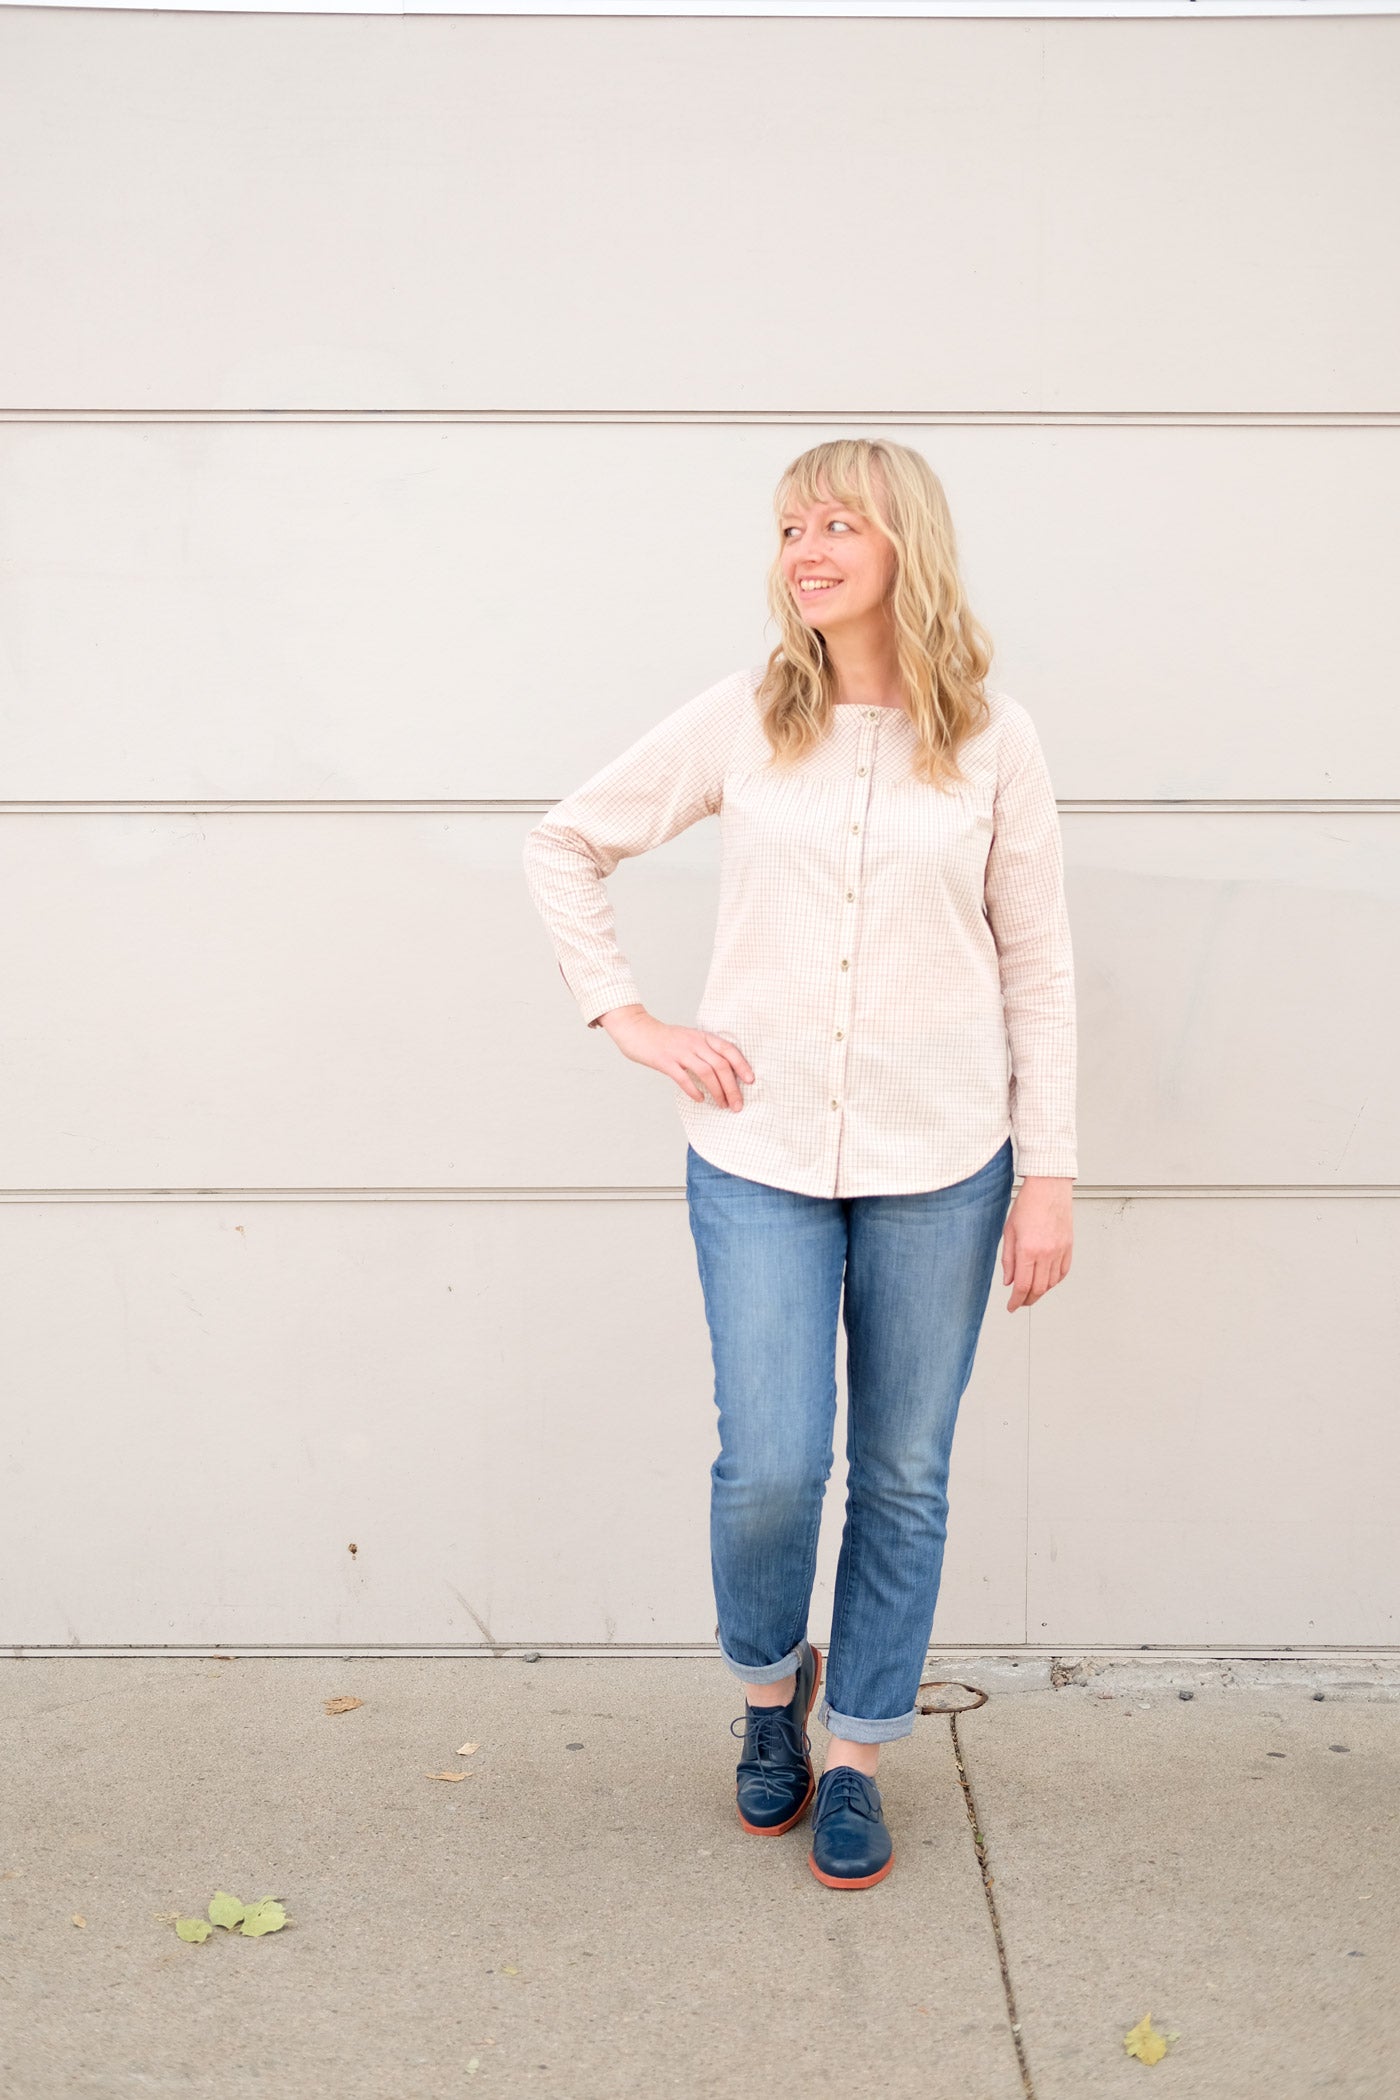 Woman standing in front of an off white wall in jeans and a very pale peach button up shirt. She smiles and looks off to the left with one hand on her hip.